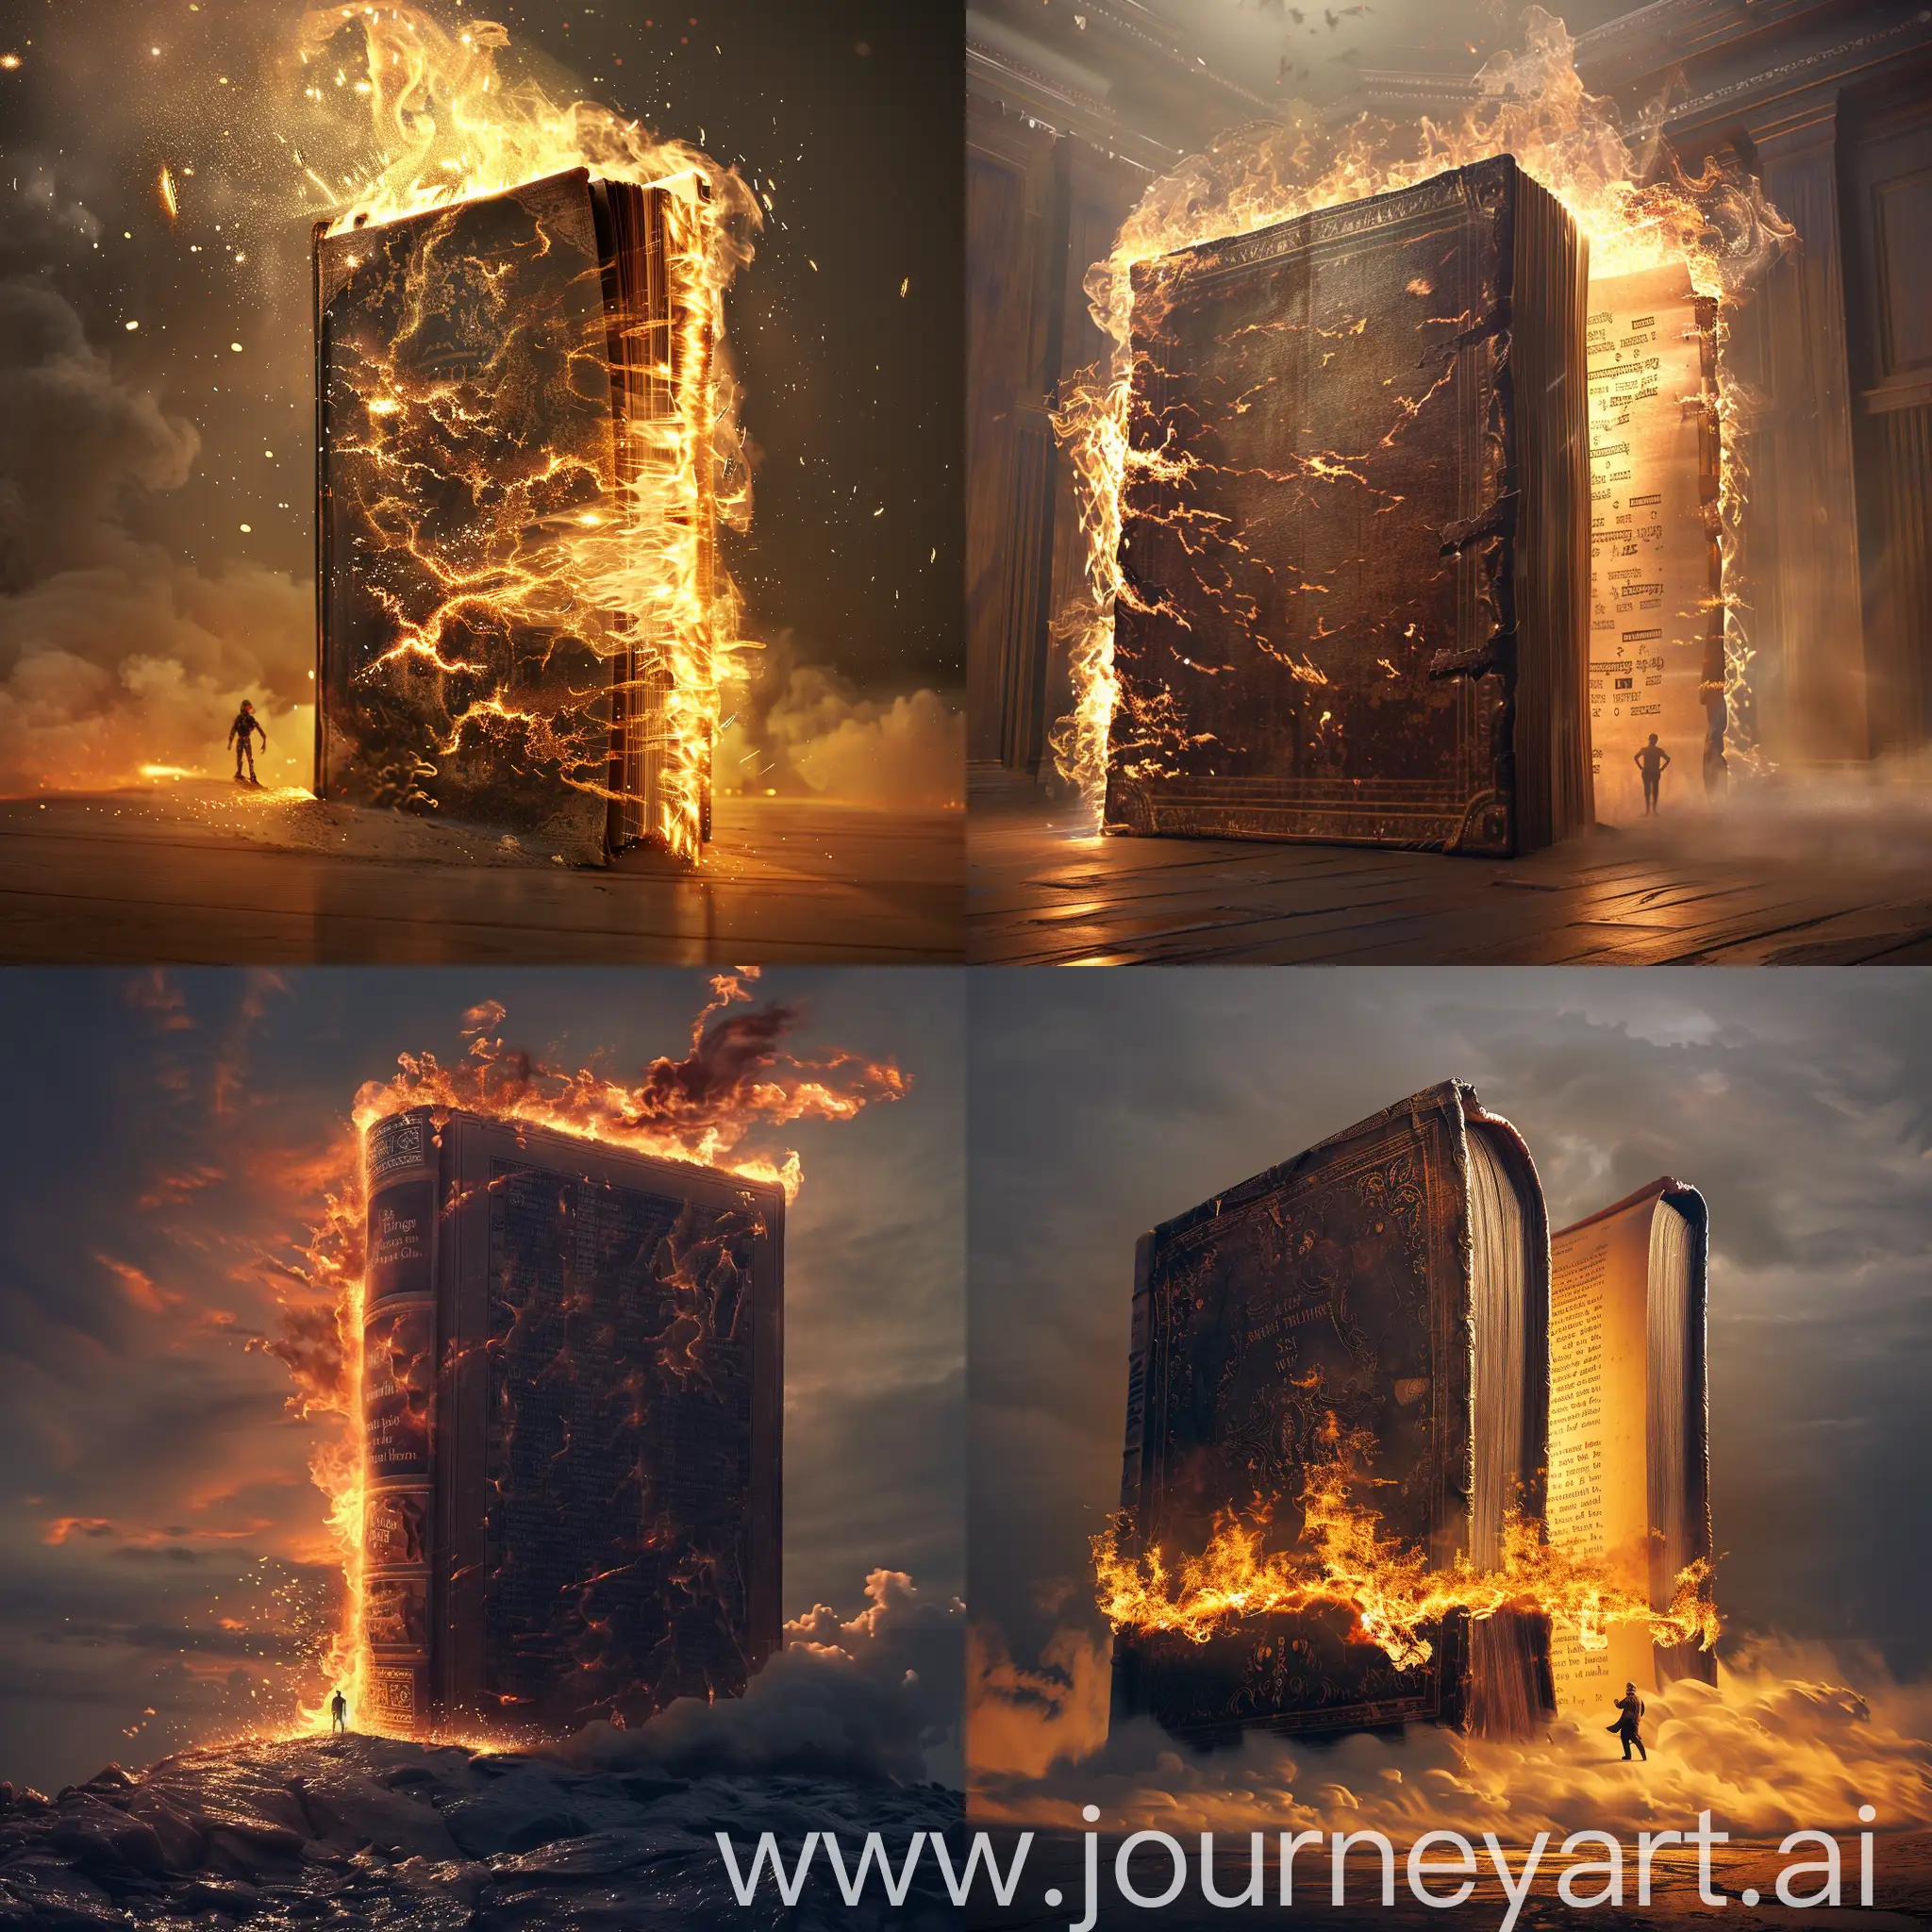 Gigantic book 20 meters high with a small man behind. Fire across, action, dramatic